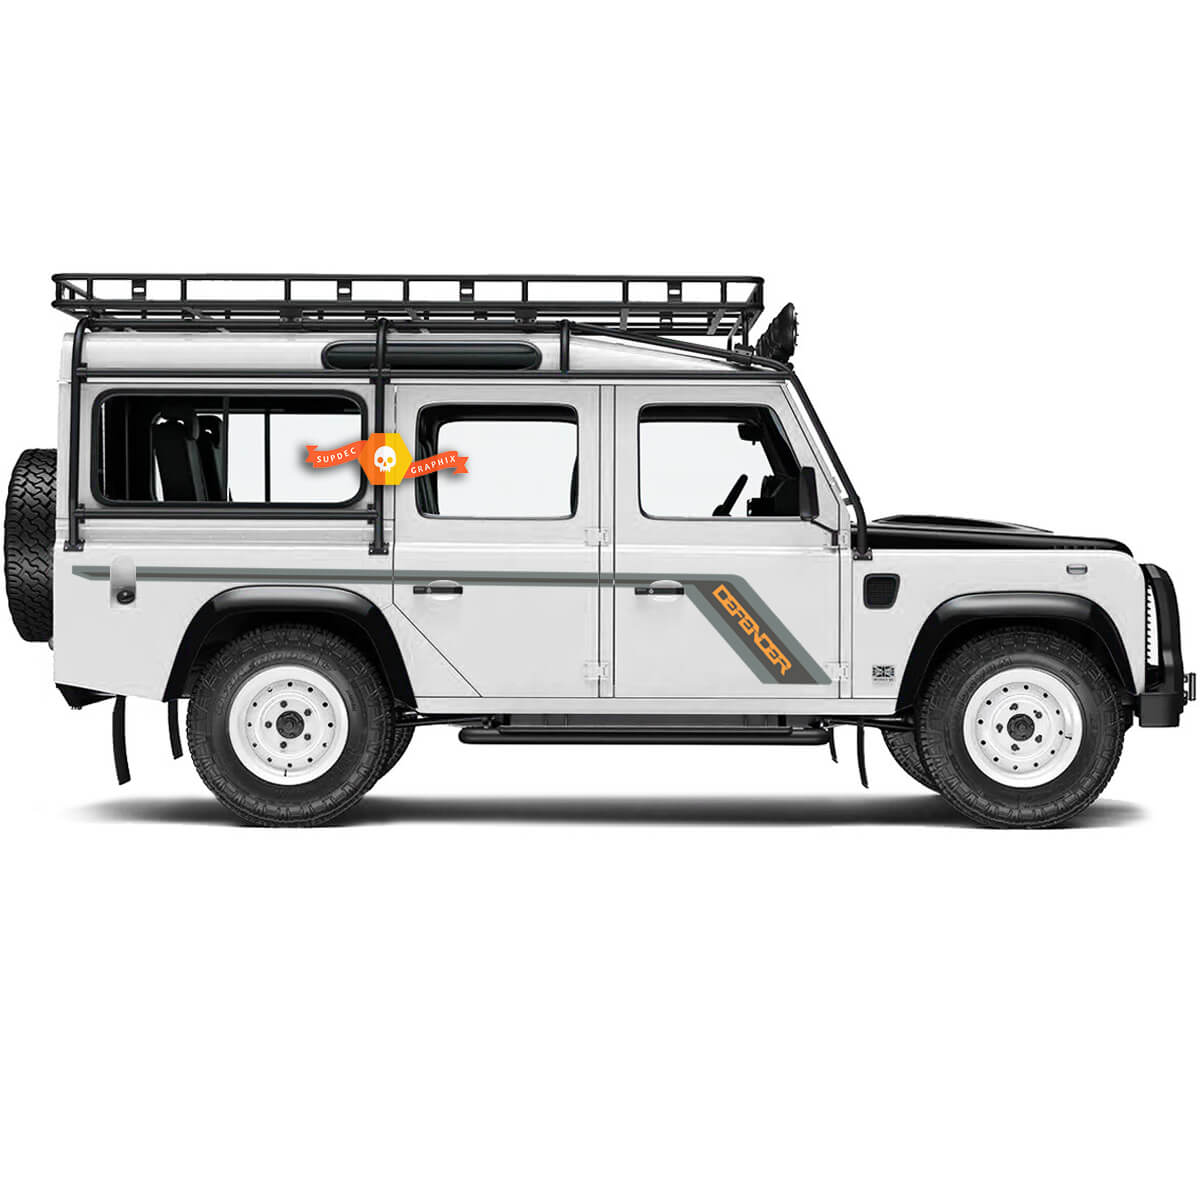 Land Rover Defender 110 -- Custom text - Side doors Decal For Land Rover Defender 110